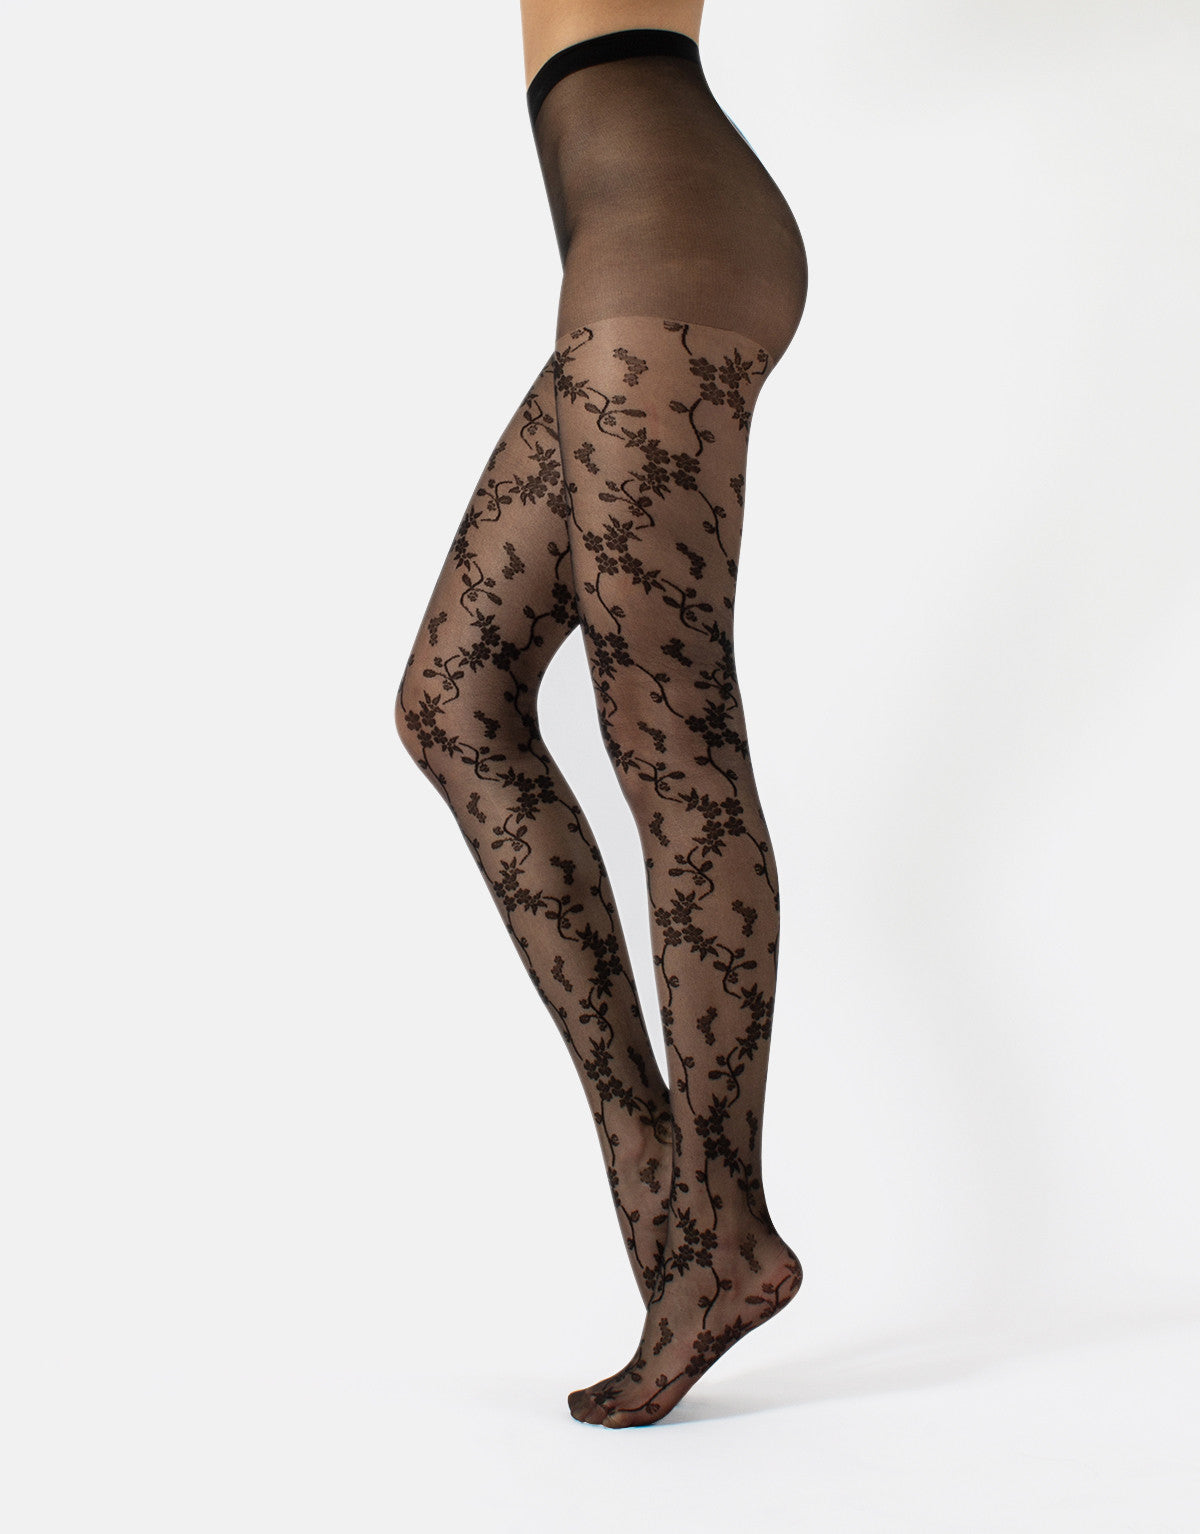 Calzitaly Floral Tights - Sheer black fashion tights with a woven floral lace style pattern, plain semi-opaque boxer brief, deep waistband, flat seams and cotton gusset.